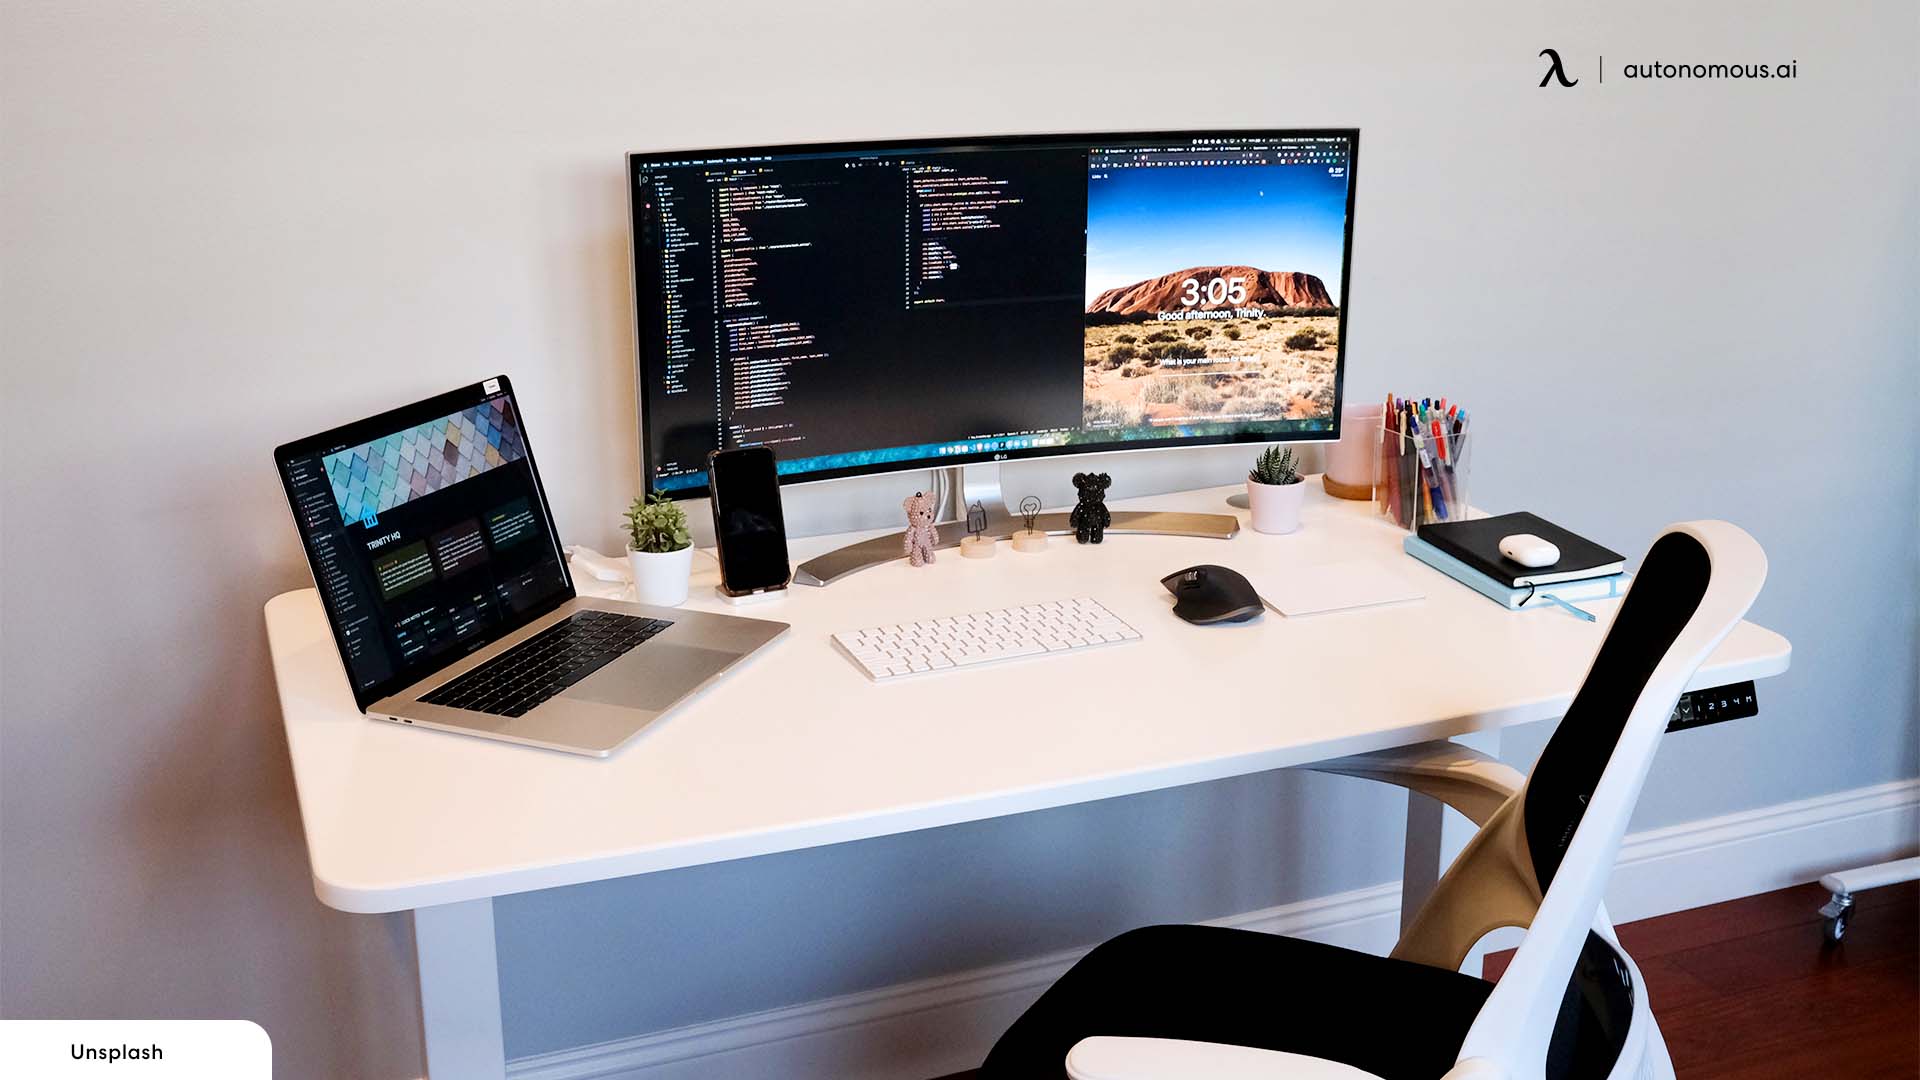 26 Ways to Organize Office Desk for Best Productivity